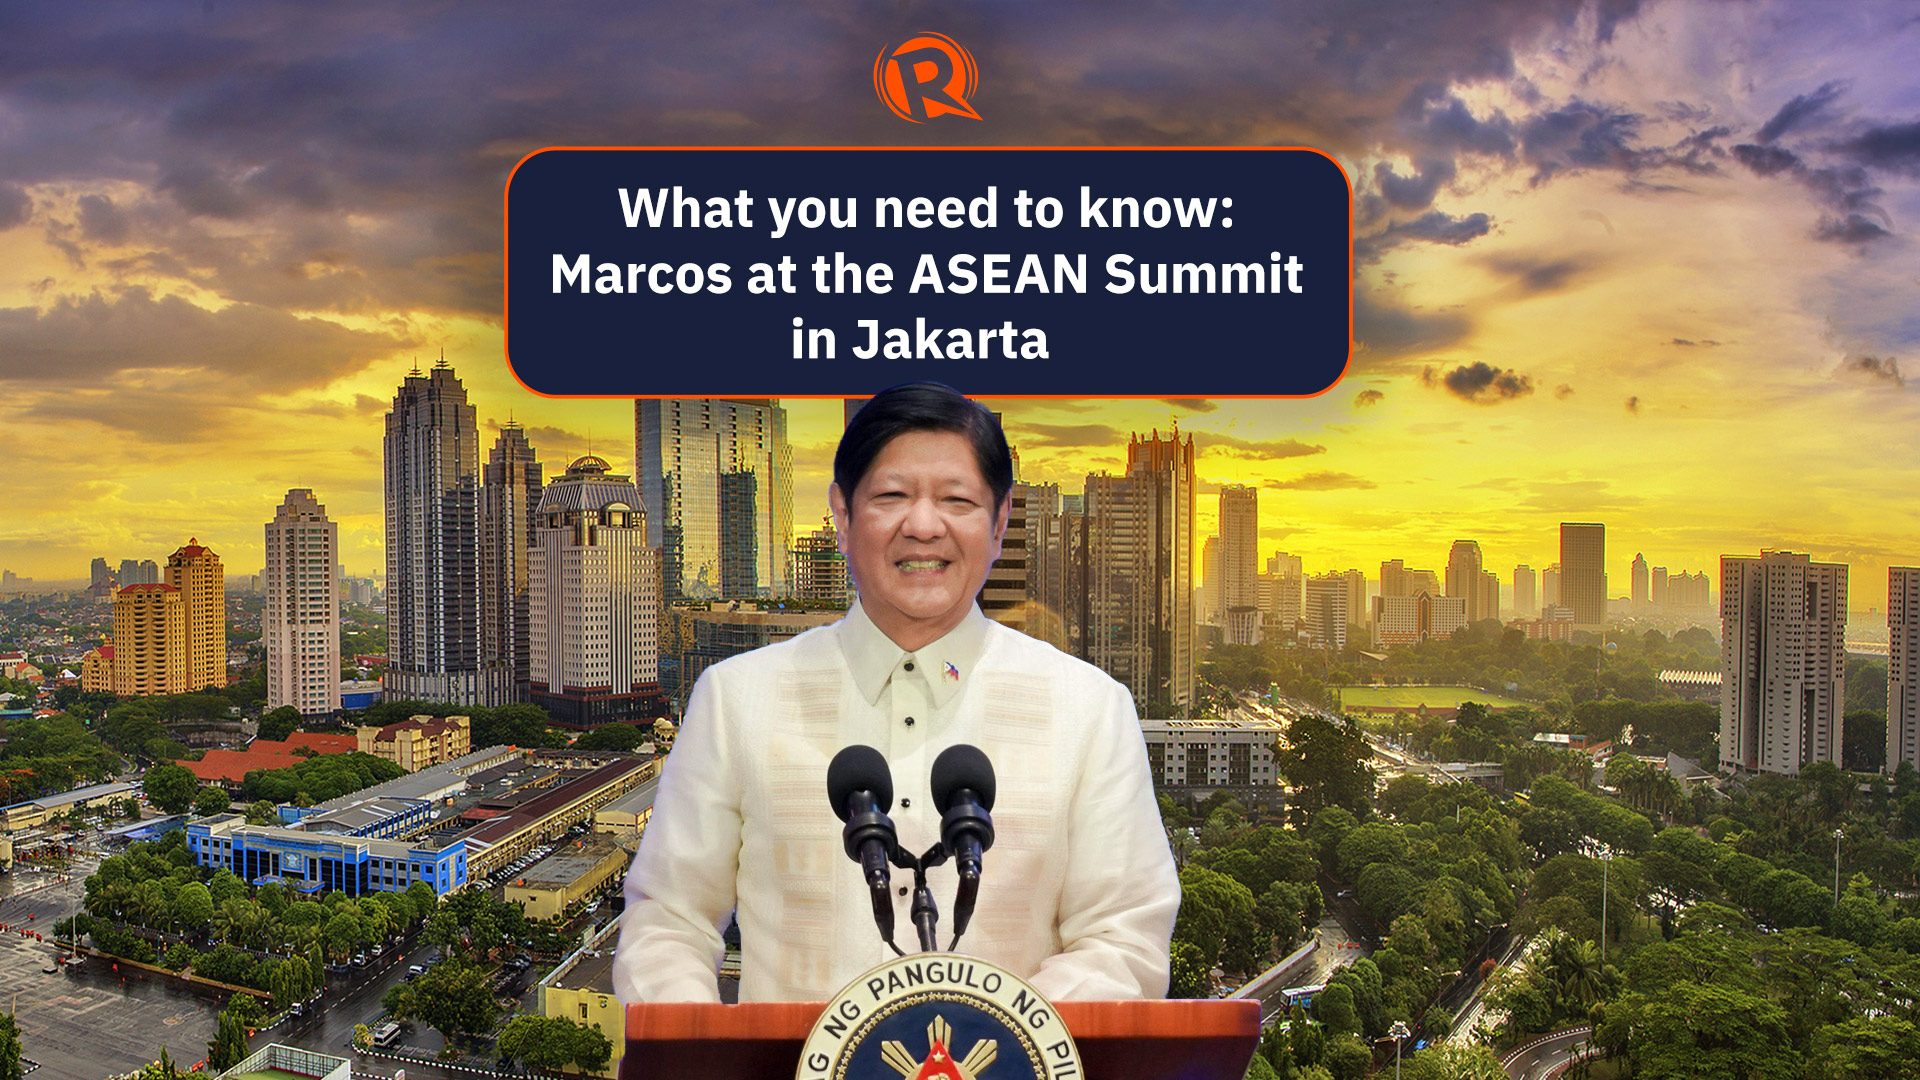 What you need to know: Marcos in Jakarta for the ASEAN Summit